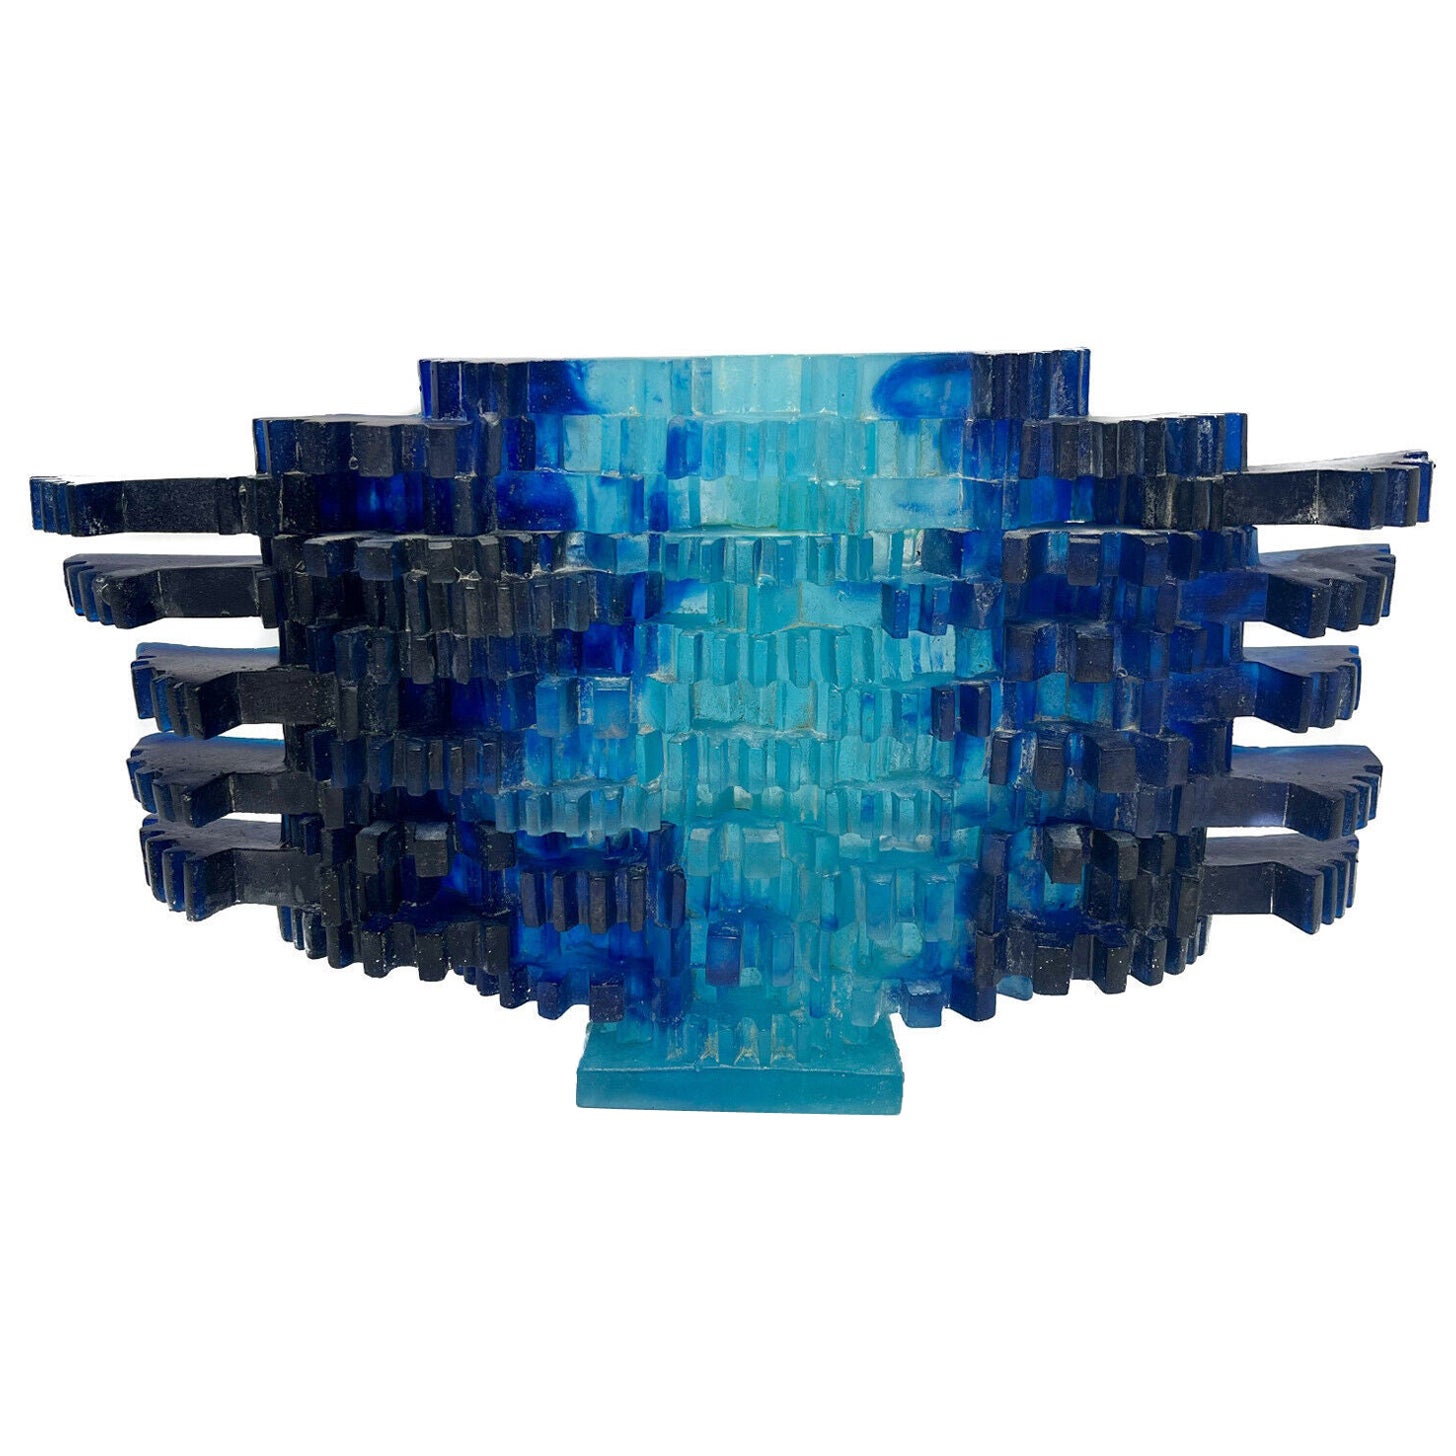 Daum Pate De Vere Abstract Sculpture by Mard De Rosny, Limited Edition of 200 For Sale